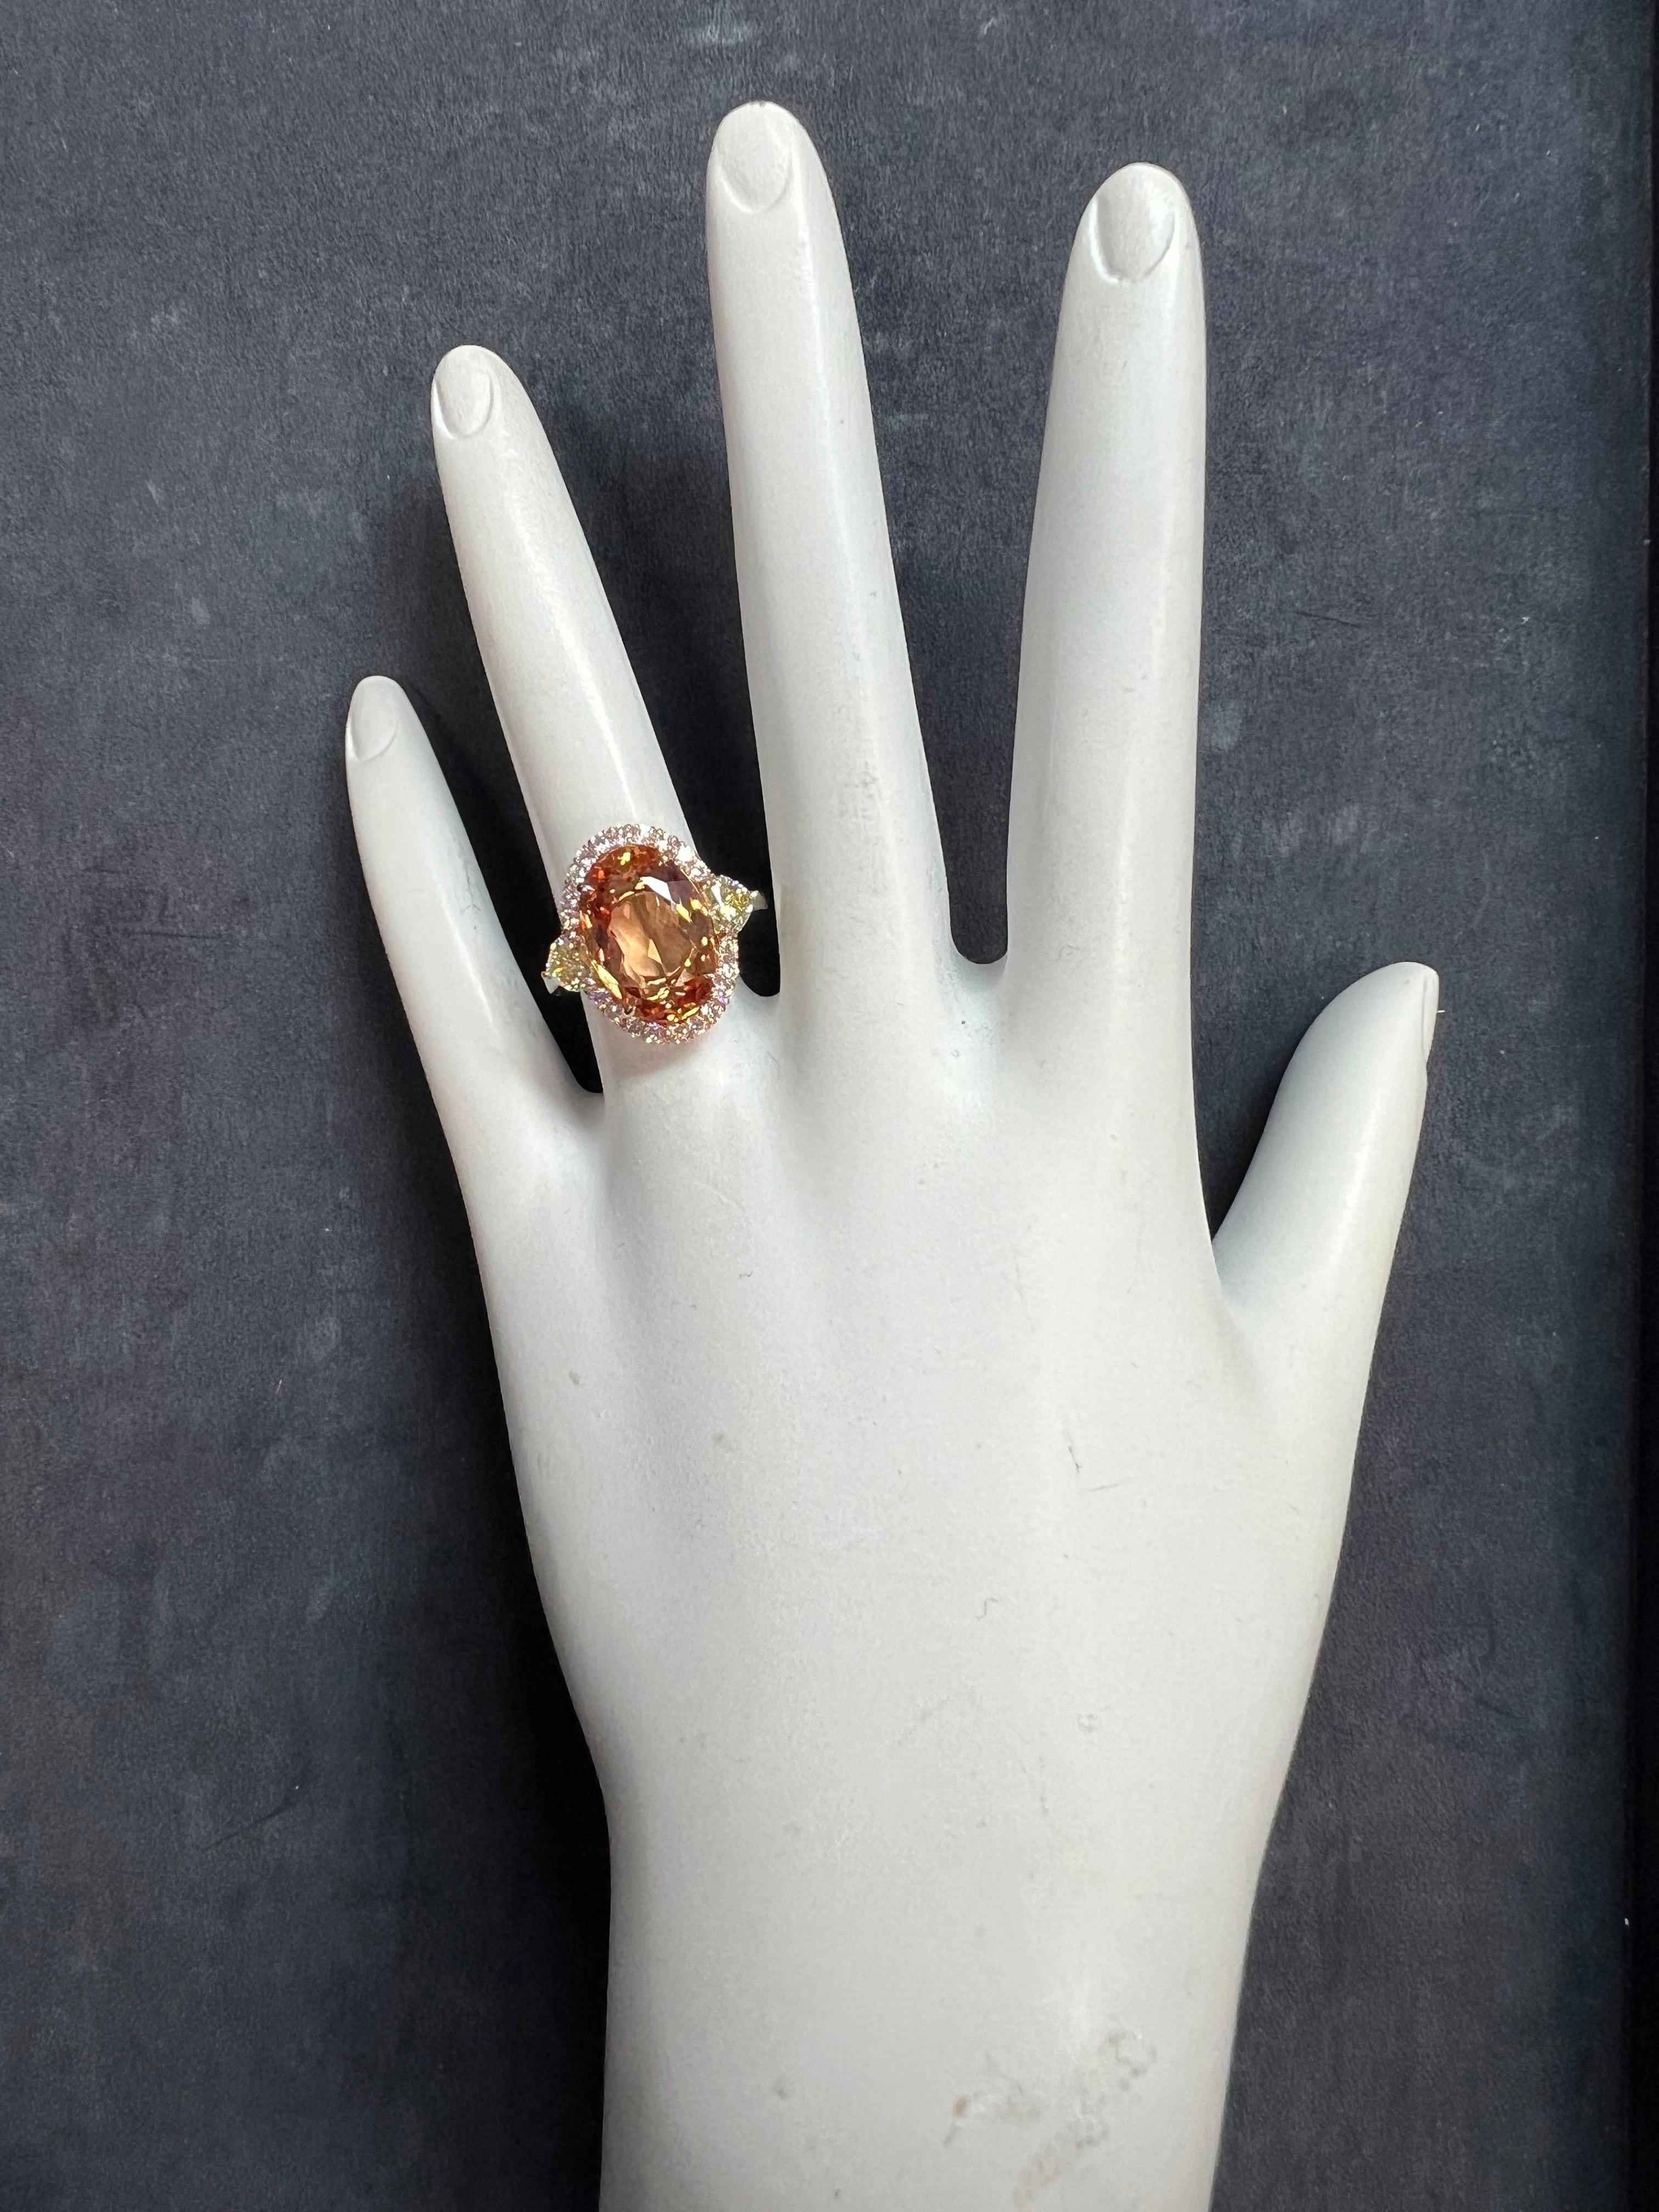 A magnificent 18k Rose and White Gold Natural Imperial Topaz and Diamond Ring. 

The center stone is a rare peach color natural Imperial Topaz 5.97 carat measuring 13.96x9.44x5.28mm. The center stone is flanked with a matching pair of GIA certified